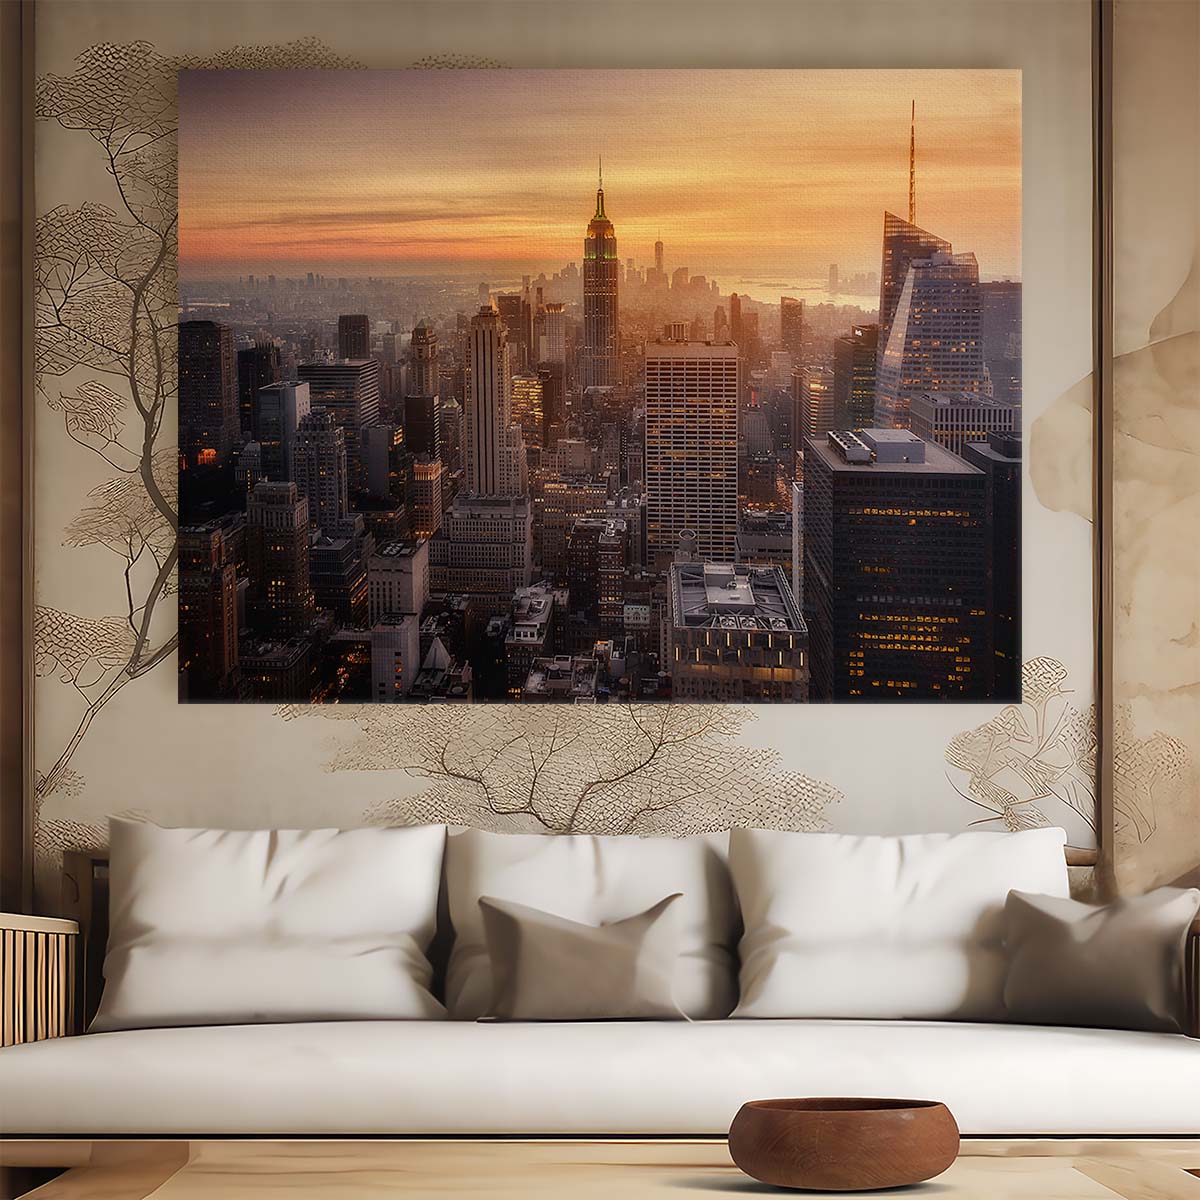 NYC Empire State Sunset Skyline Fine Art Wall Art by Luxuriance Designs. Made in USA.